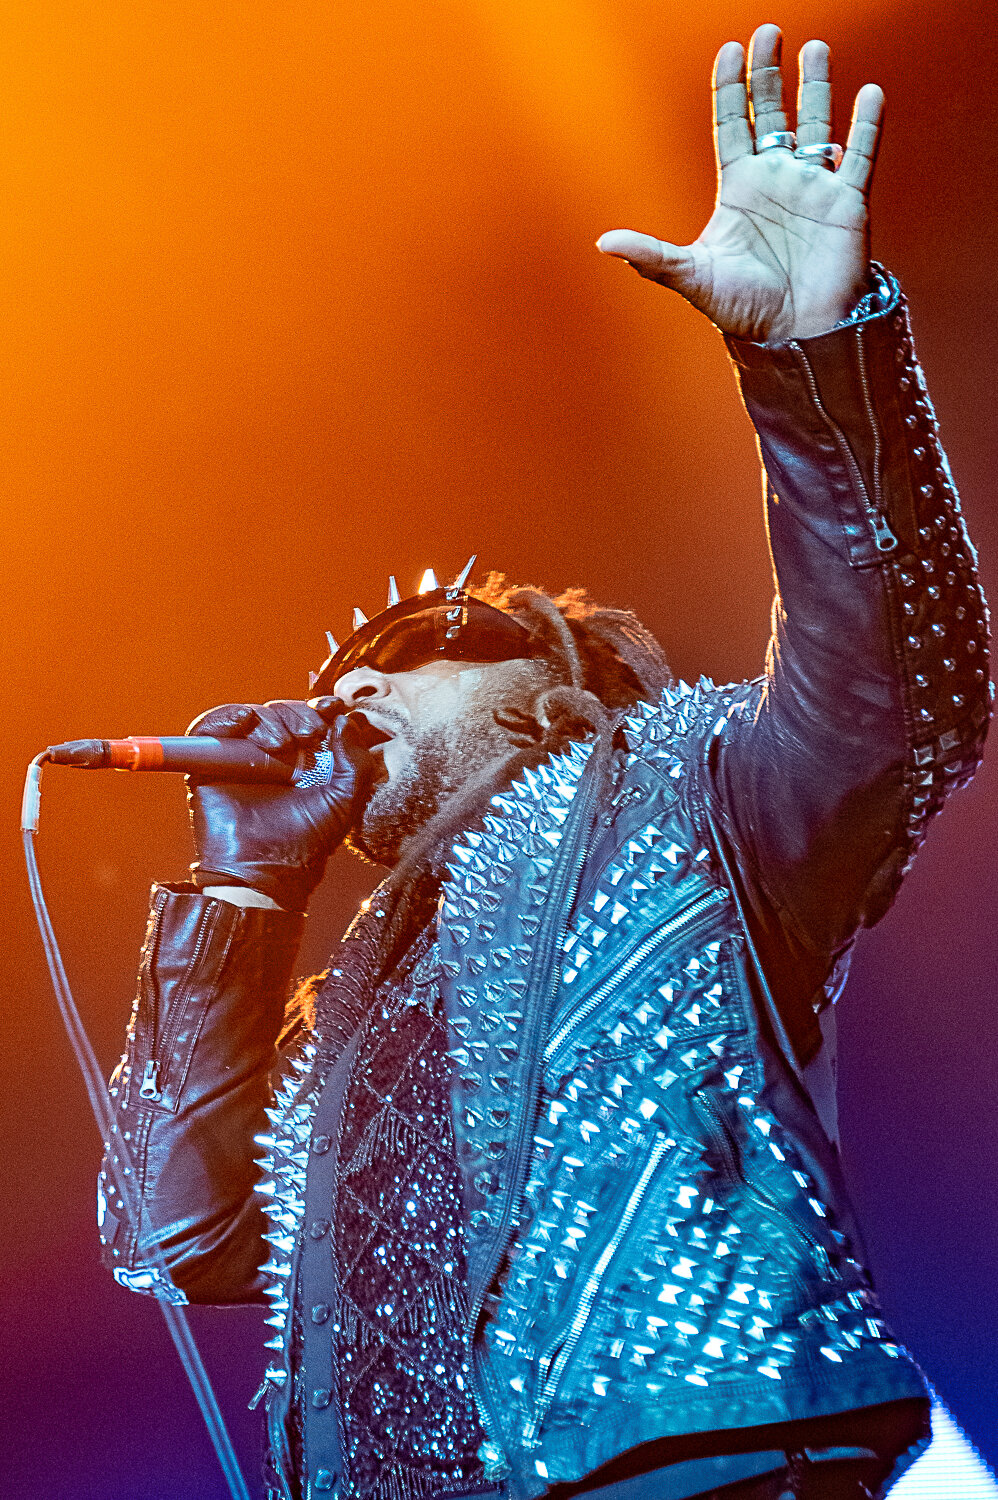 Skindred Live from Alexandra Palace, 11 May 2019